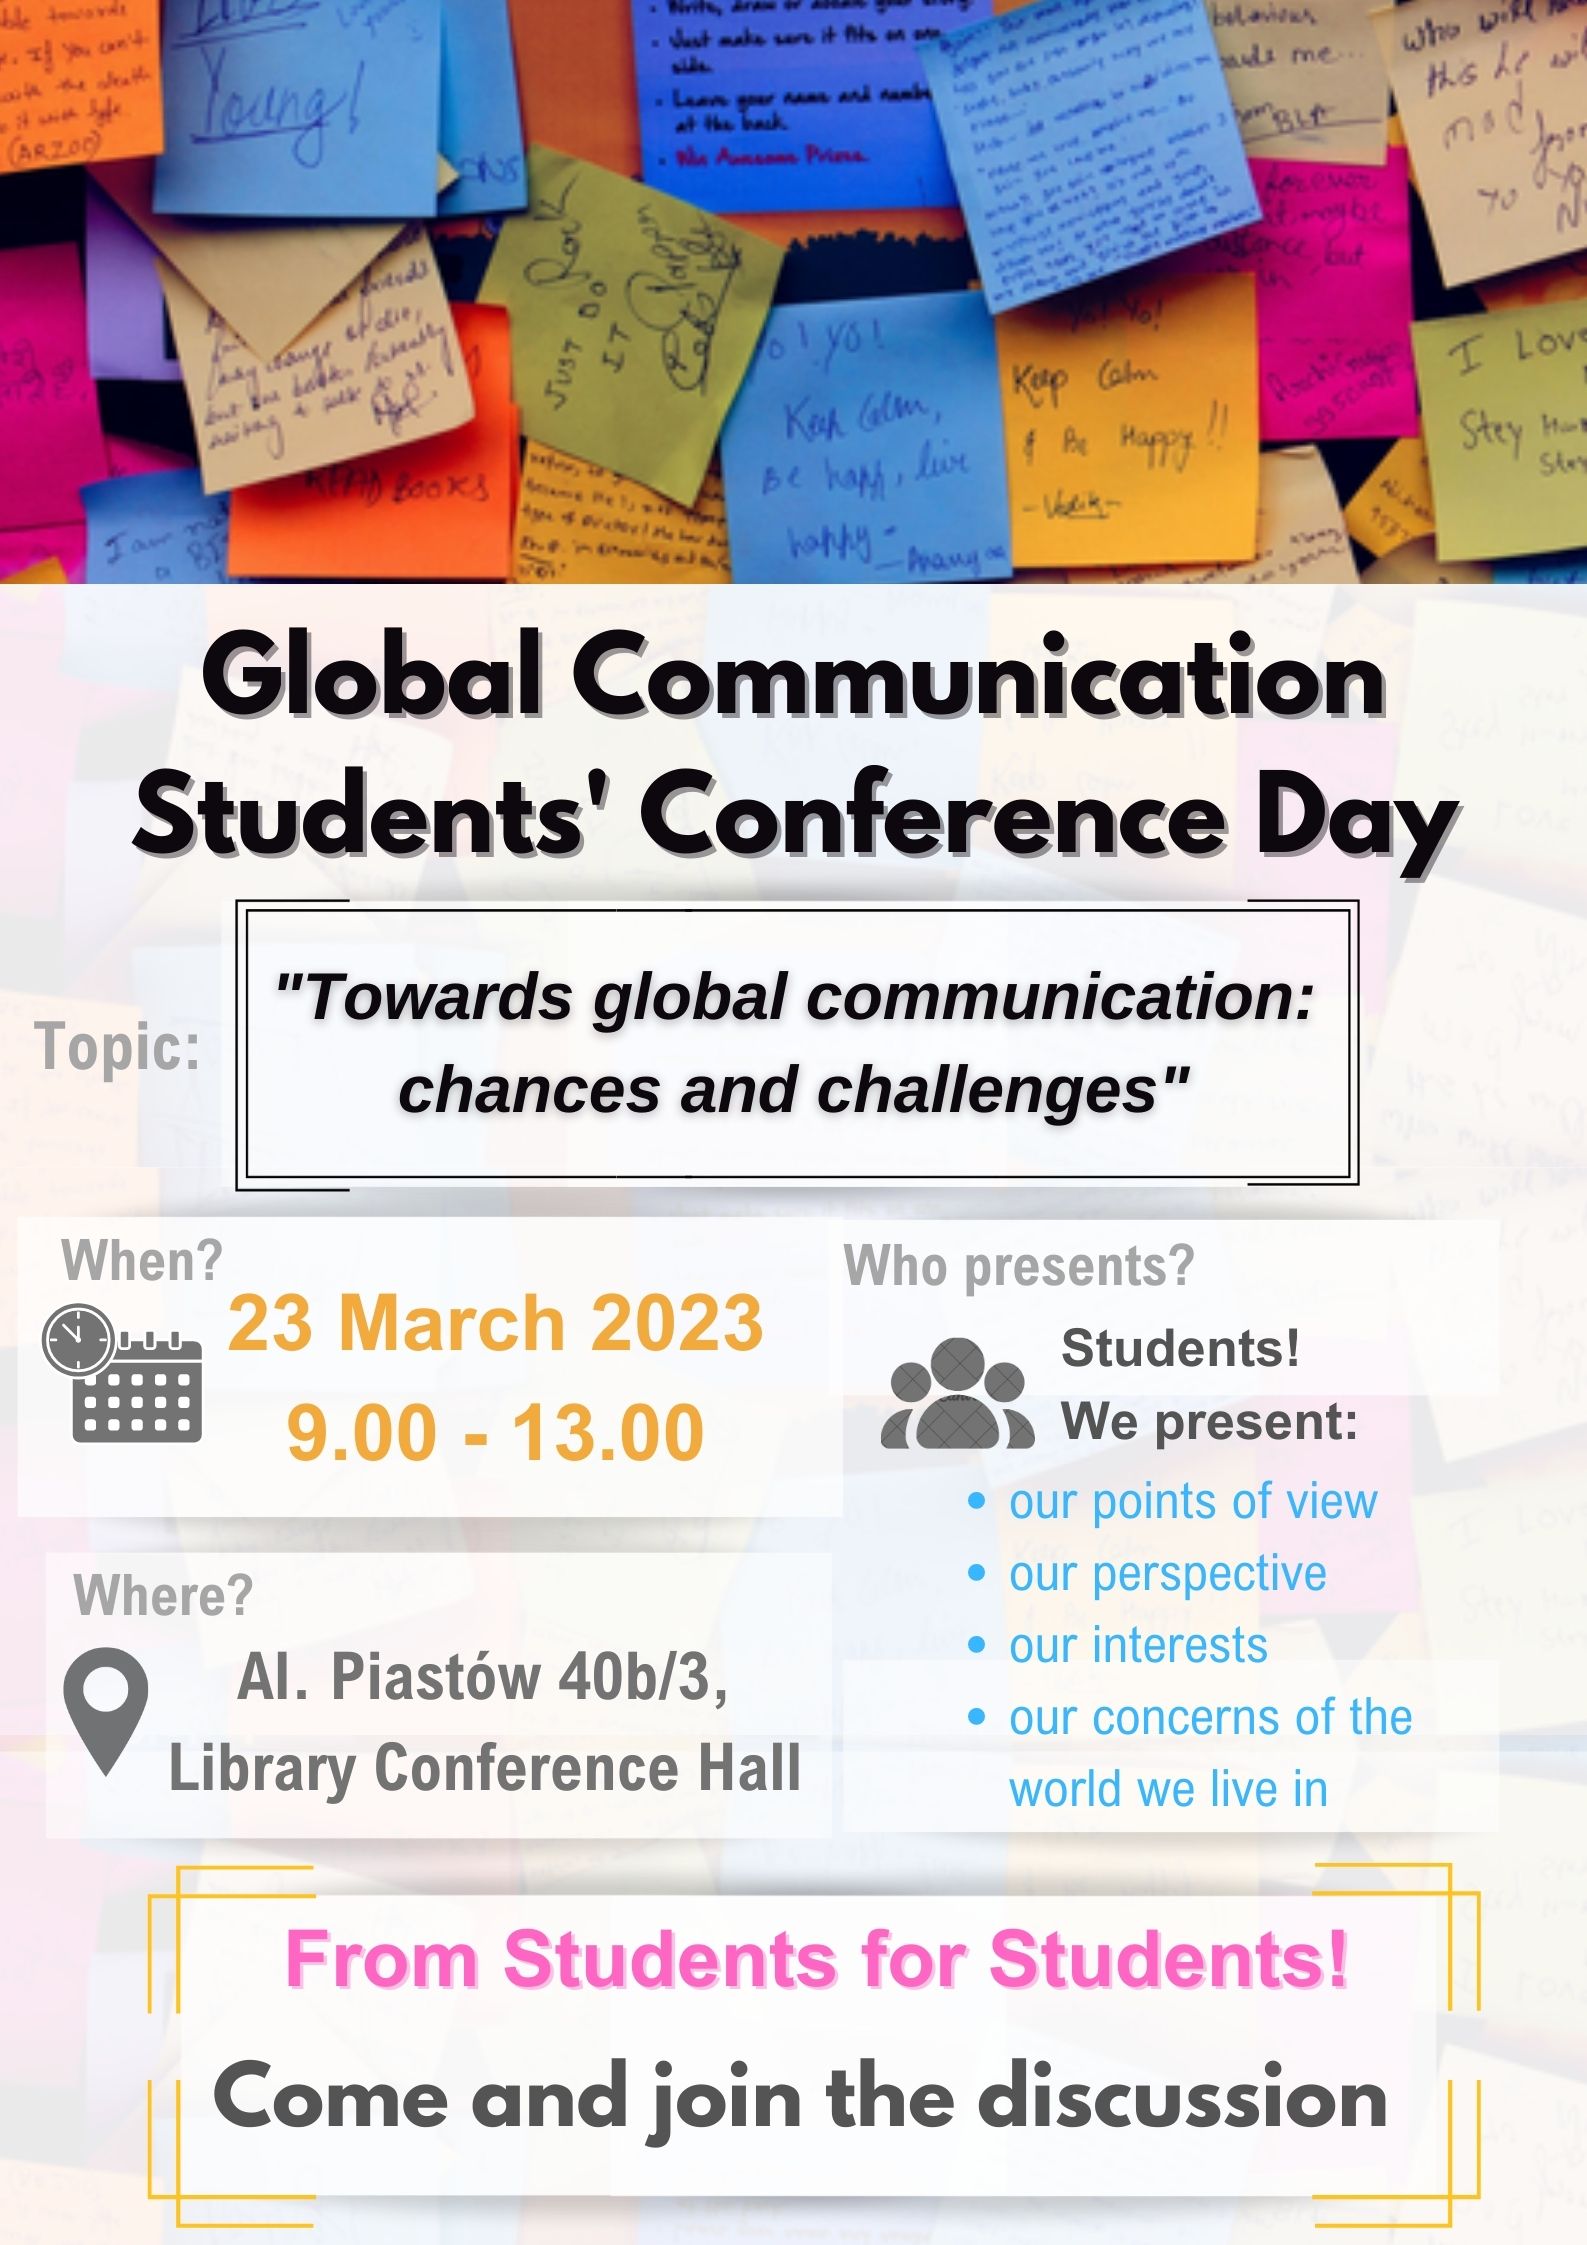 Global Communication Students’ Conference Day